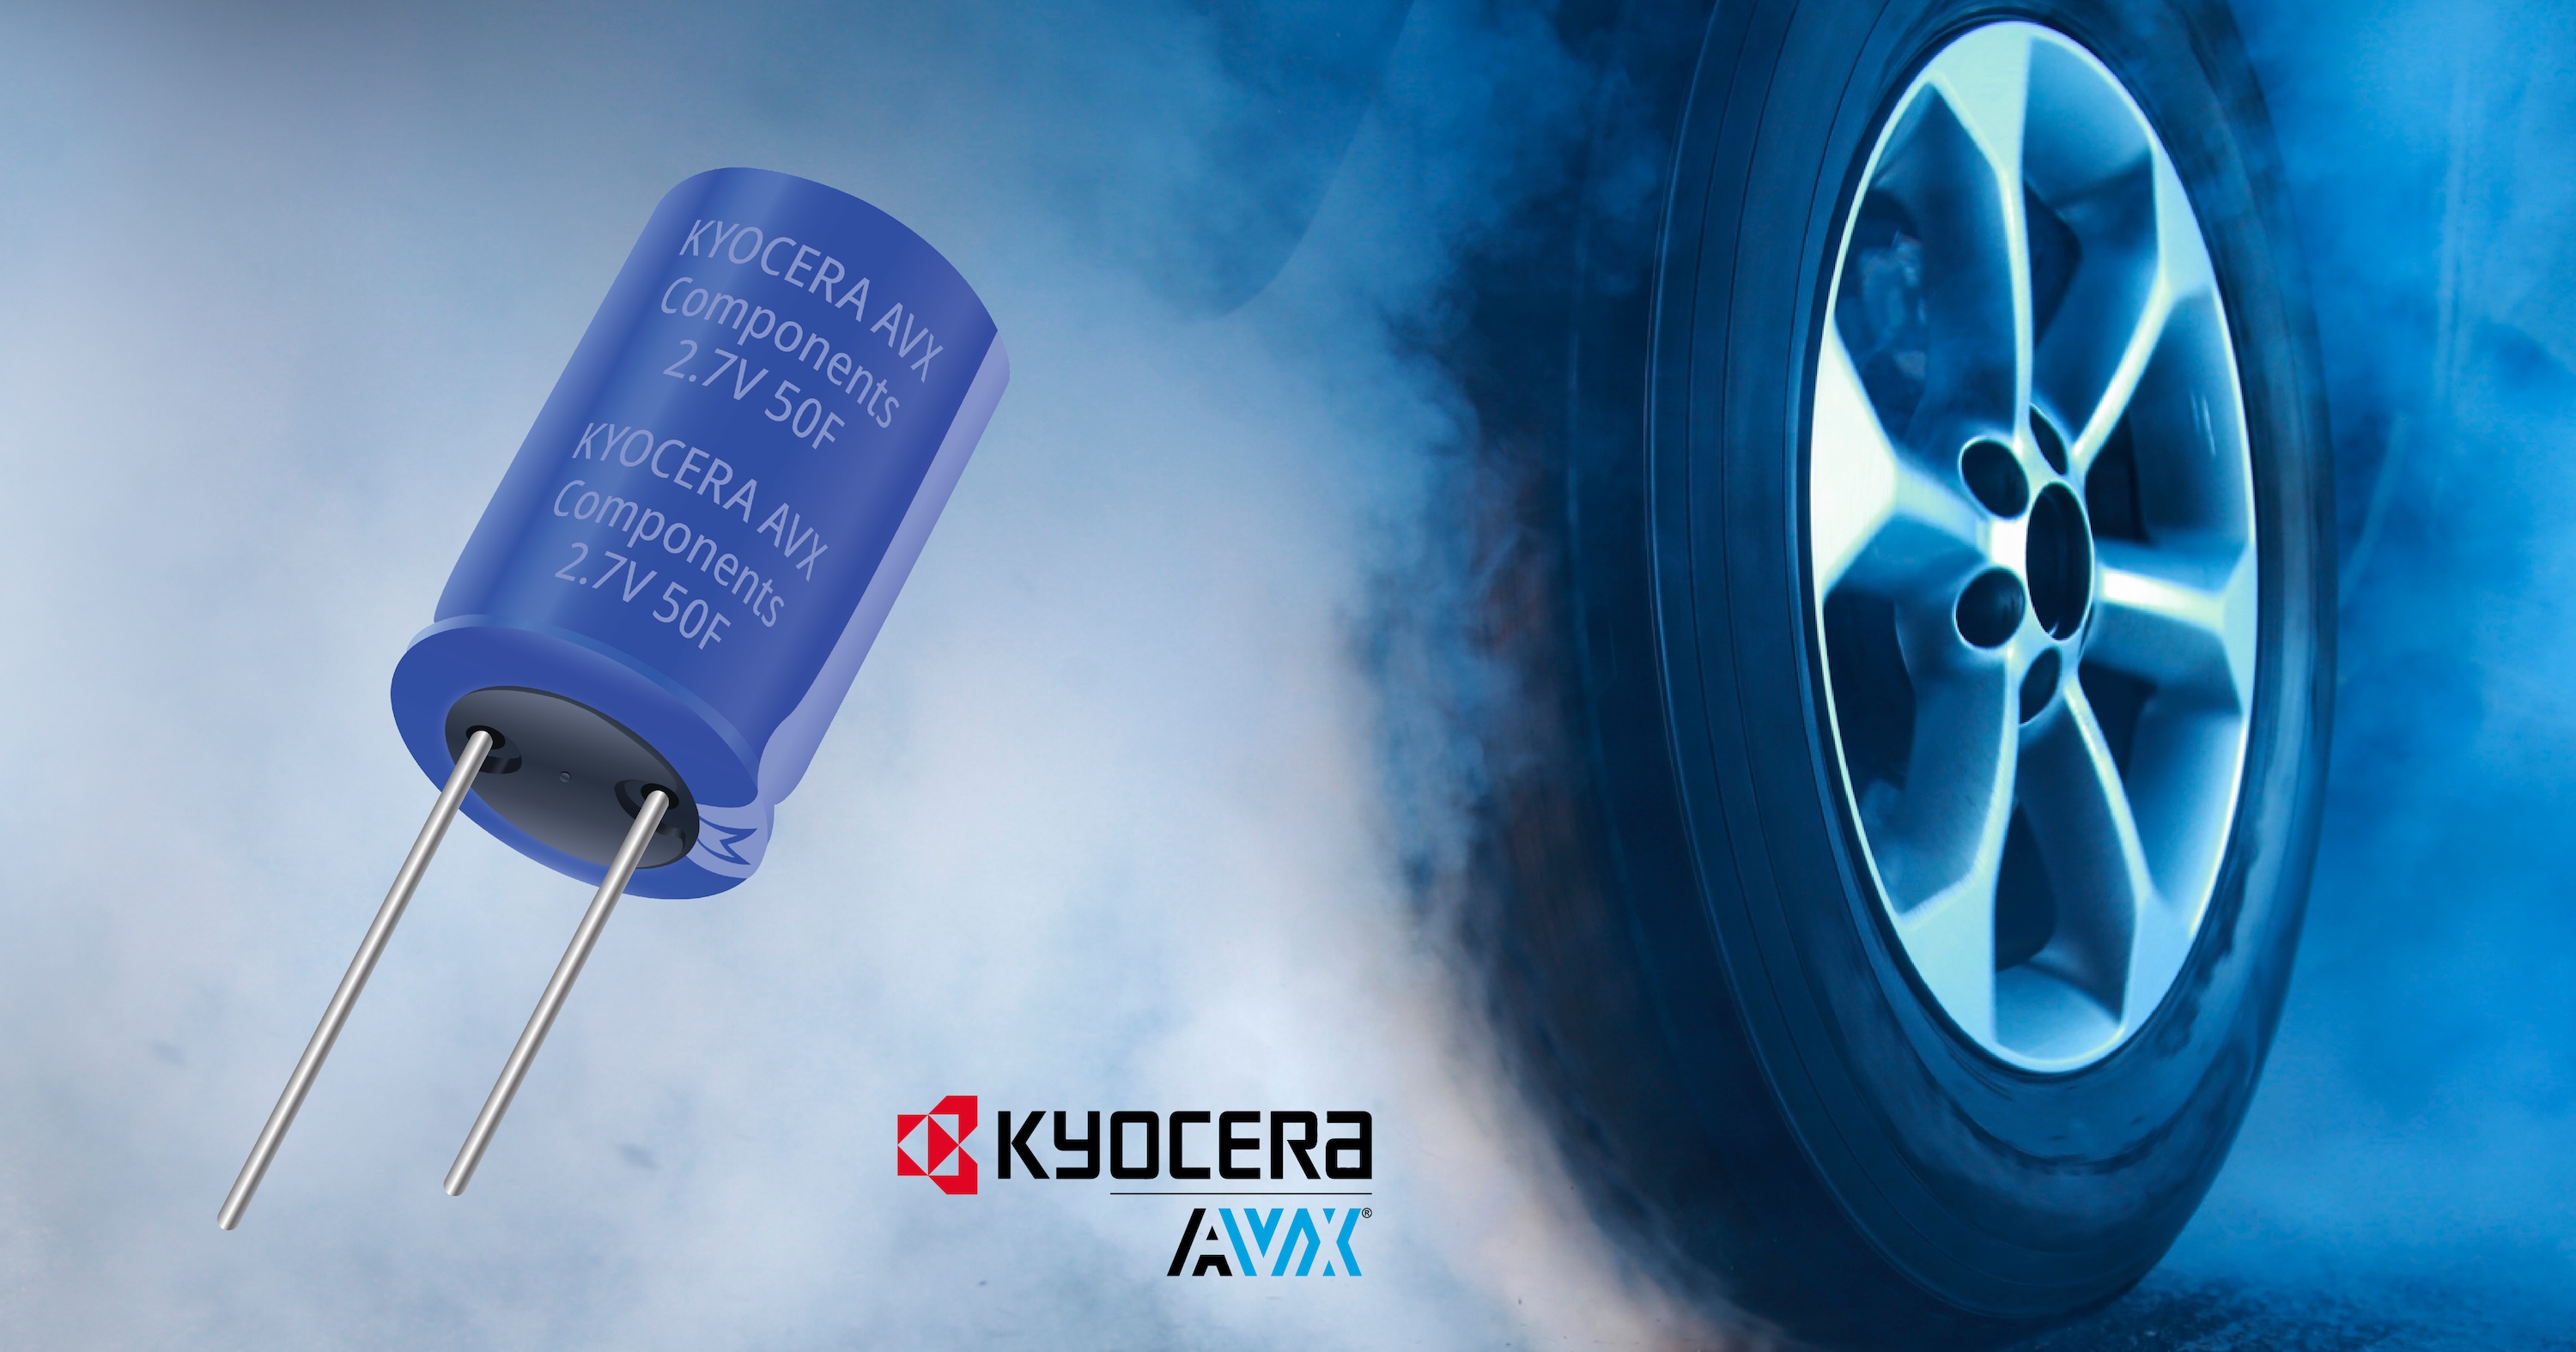 Automotive-Qualified Supercapacitors are Tested and Qualified to the Stringent AEC-Q200 Standard